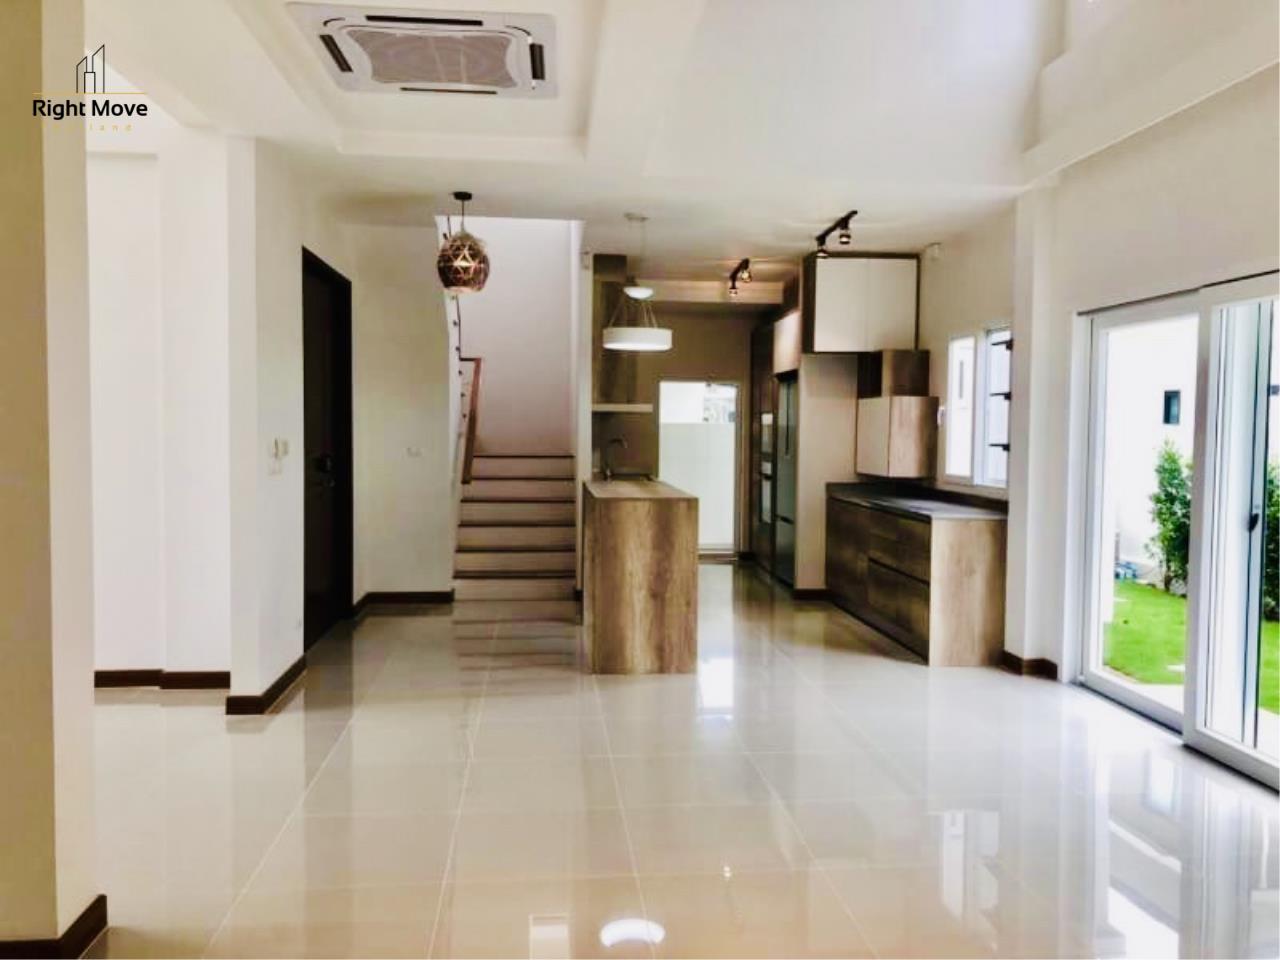 Right Move Thailand Agency's HR915  VILLA ARCADIA SRINAKARIN COMPOUND HOUSE FOR RENT 80,000 THB - 4 BEDROOM - 85 SQ.Wah 4